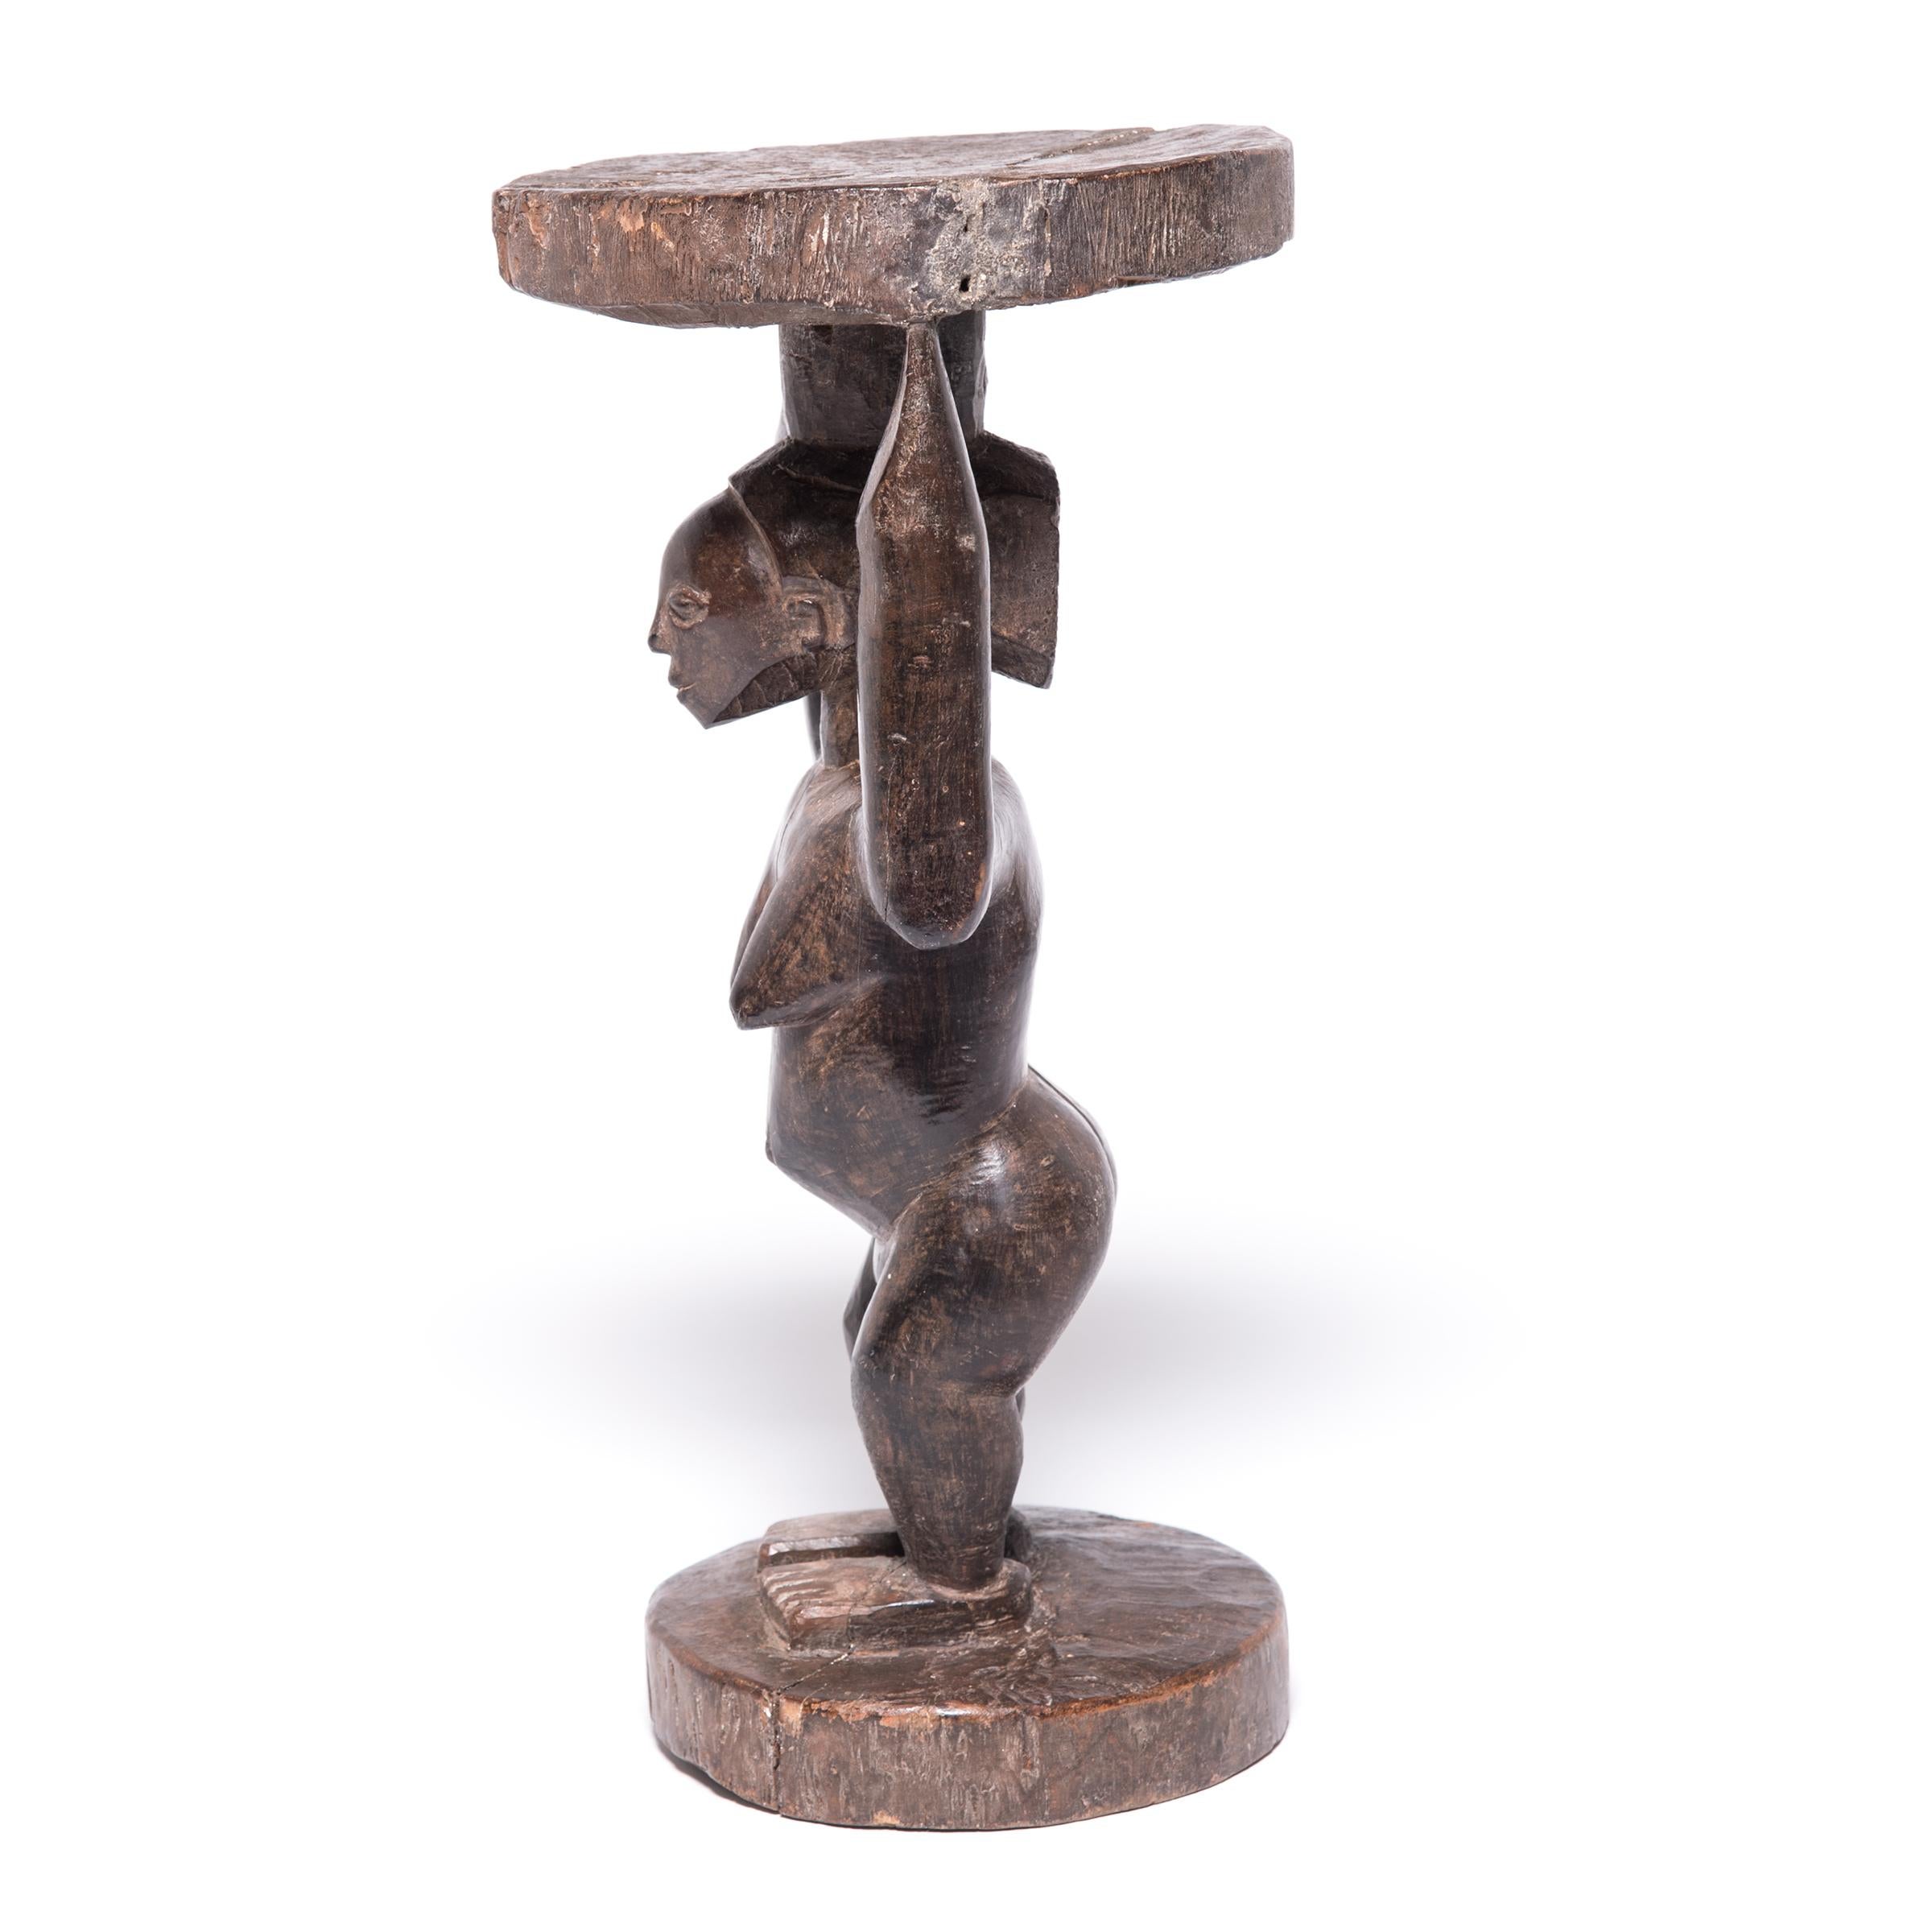 This stool by the Luba people of Zaire is indicative of their classic style. A single tree trunk was carved into a column, then further taken in until the robust figure of a woman appears. She supports the circular seat, representing the